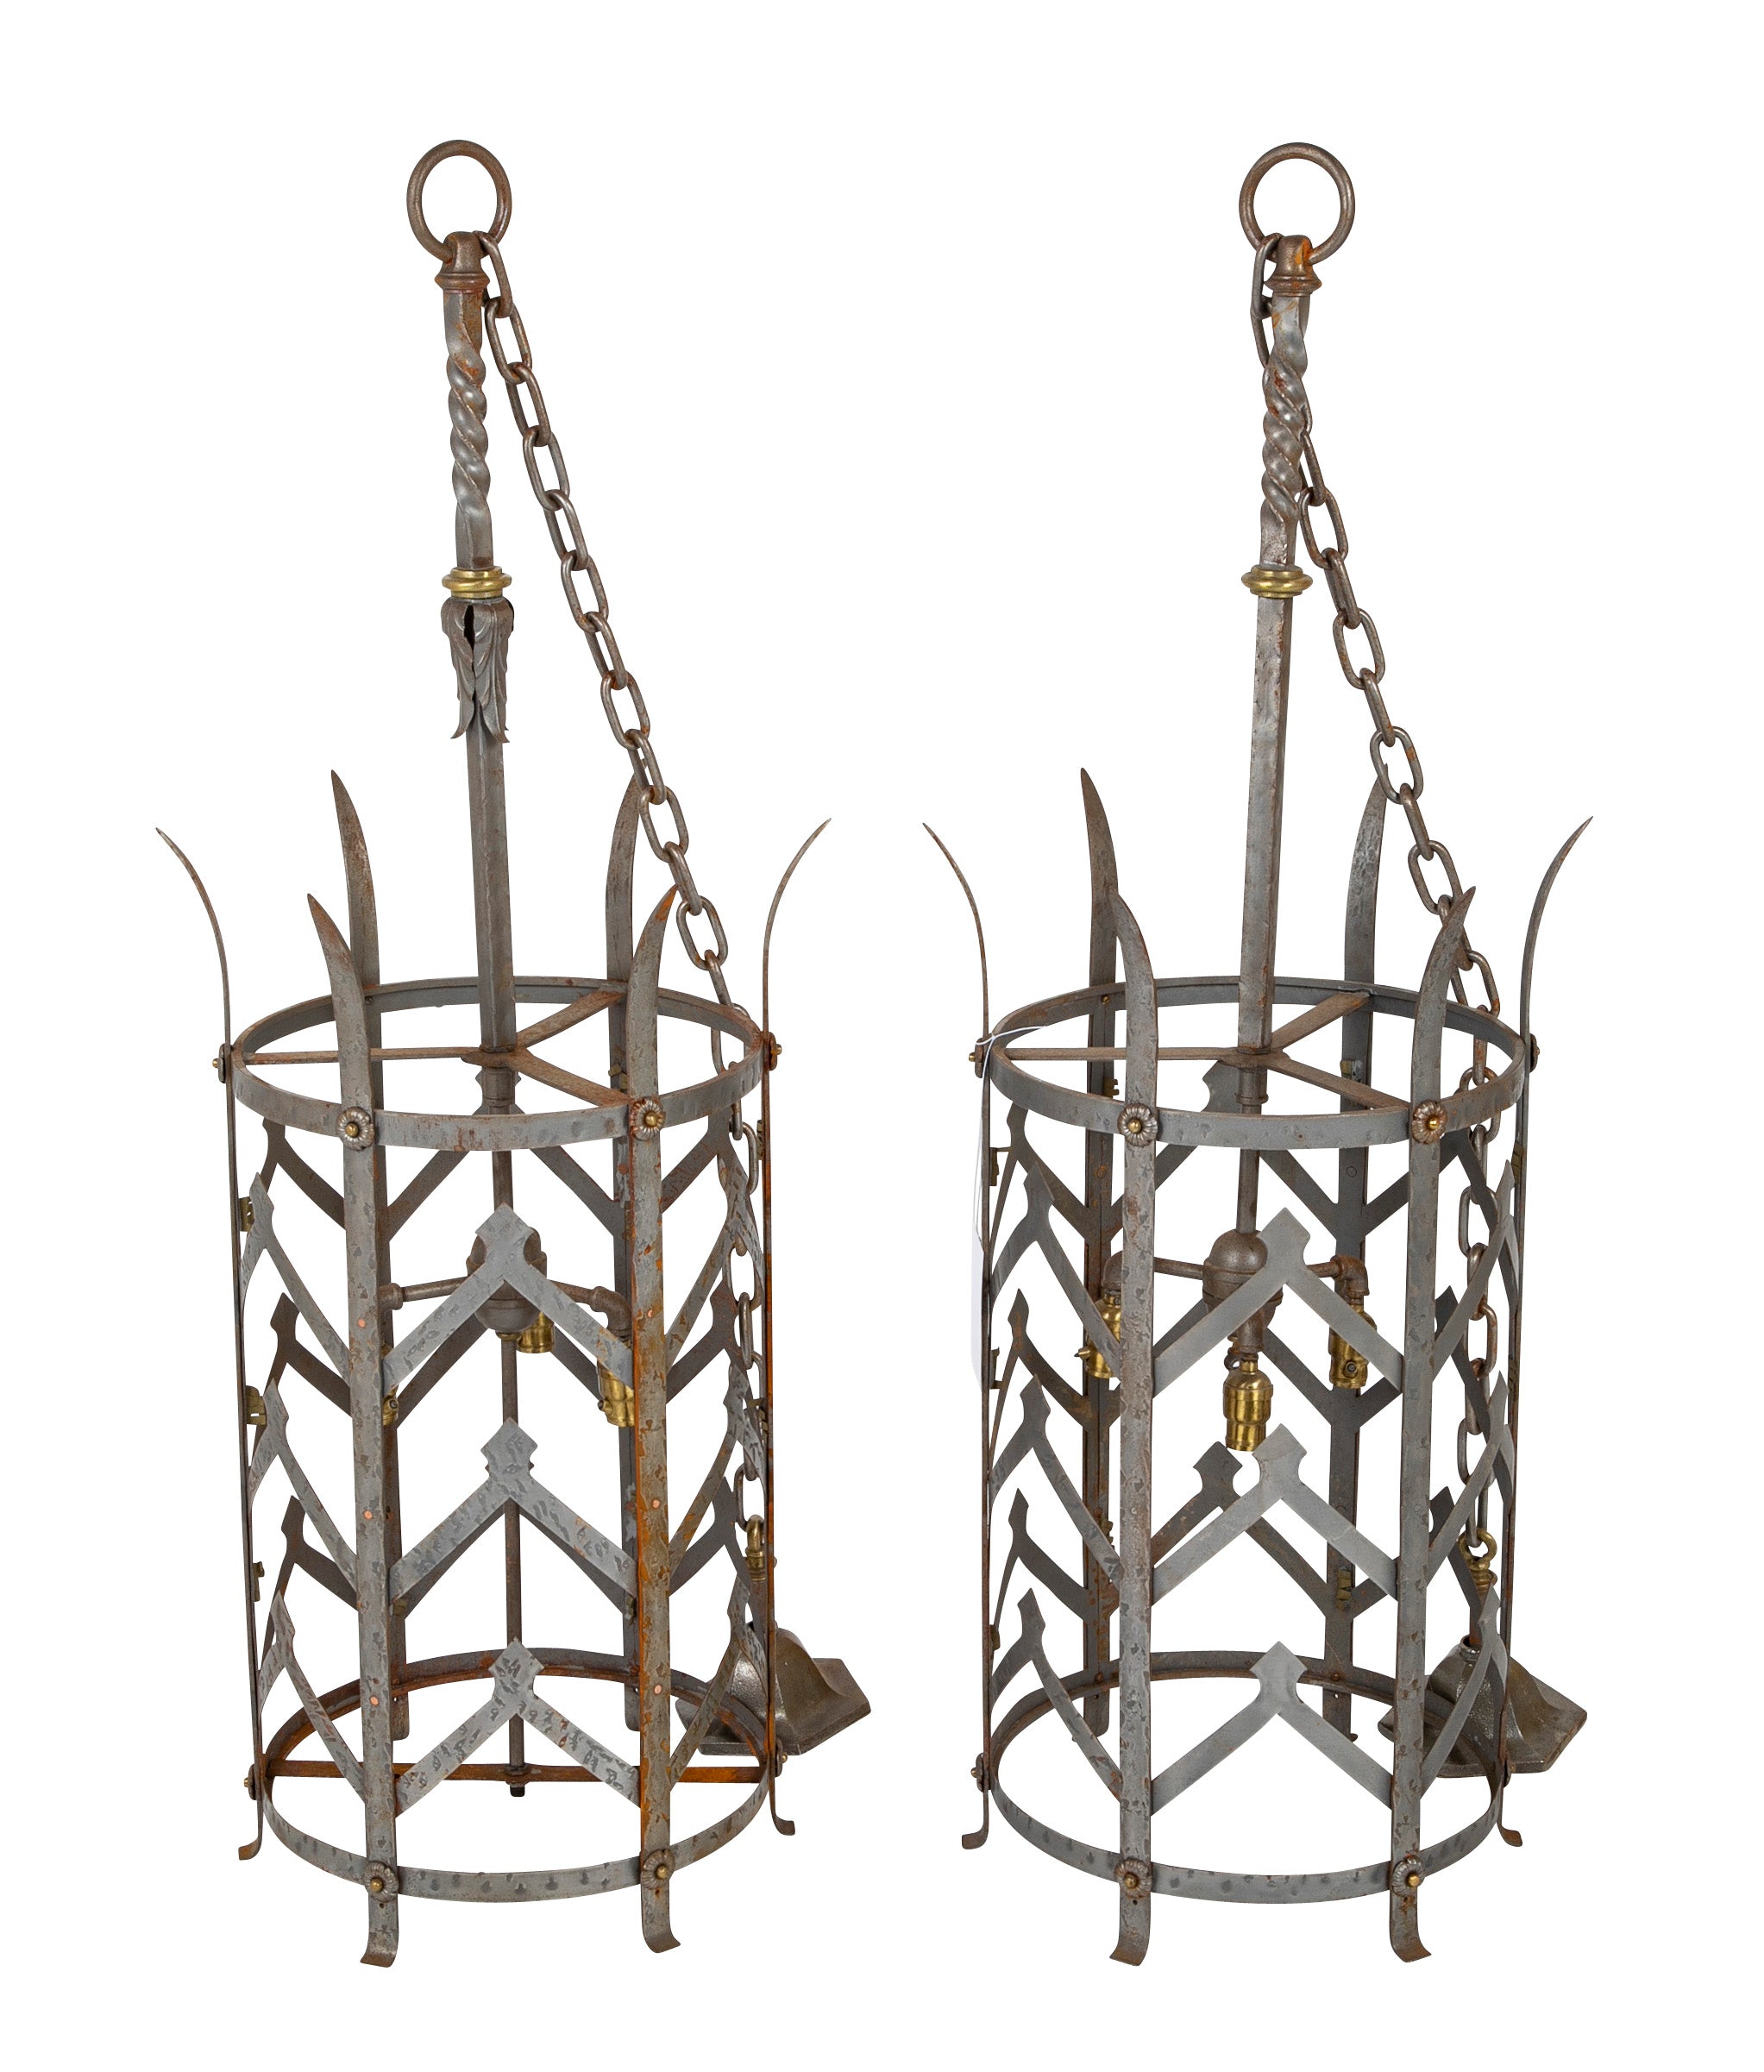 A Pair of Early 20th Century American Wrought Iron Lanterns